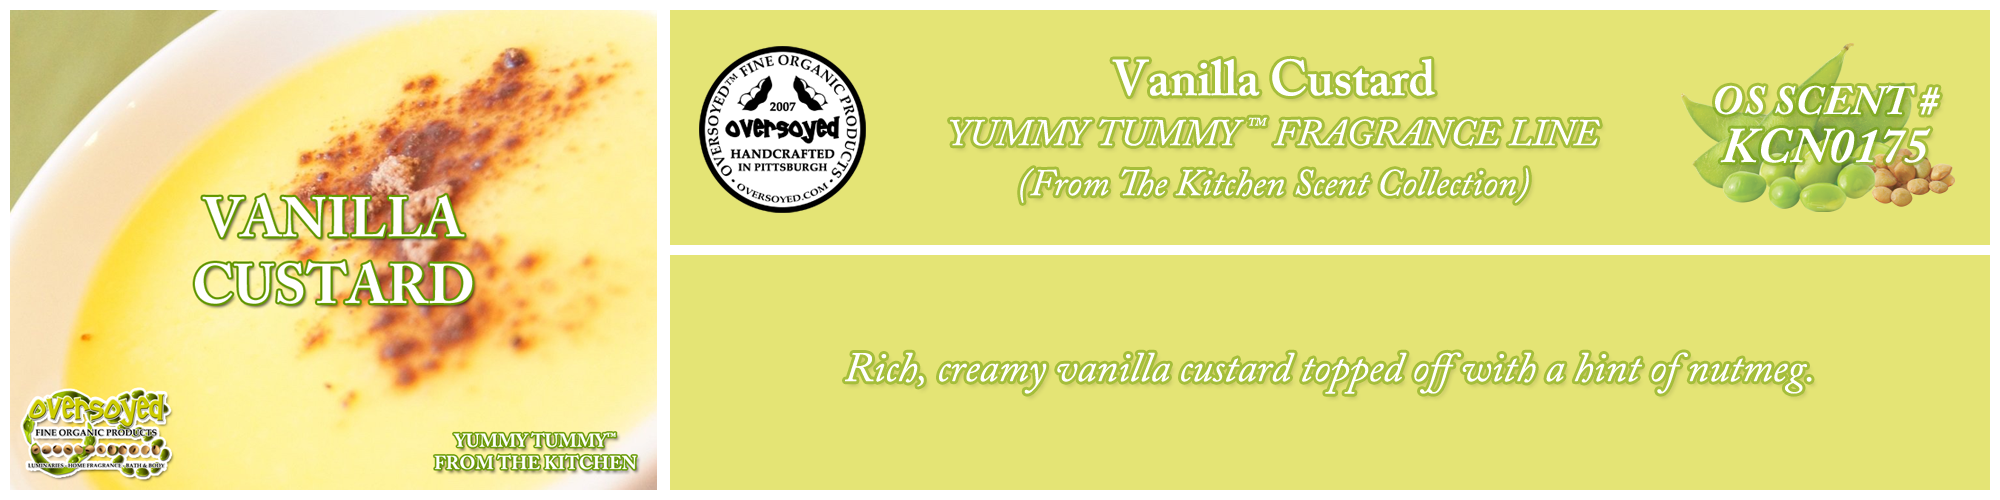 Vanilla Custard Handcrafted Products Collection